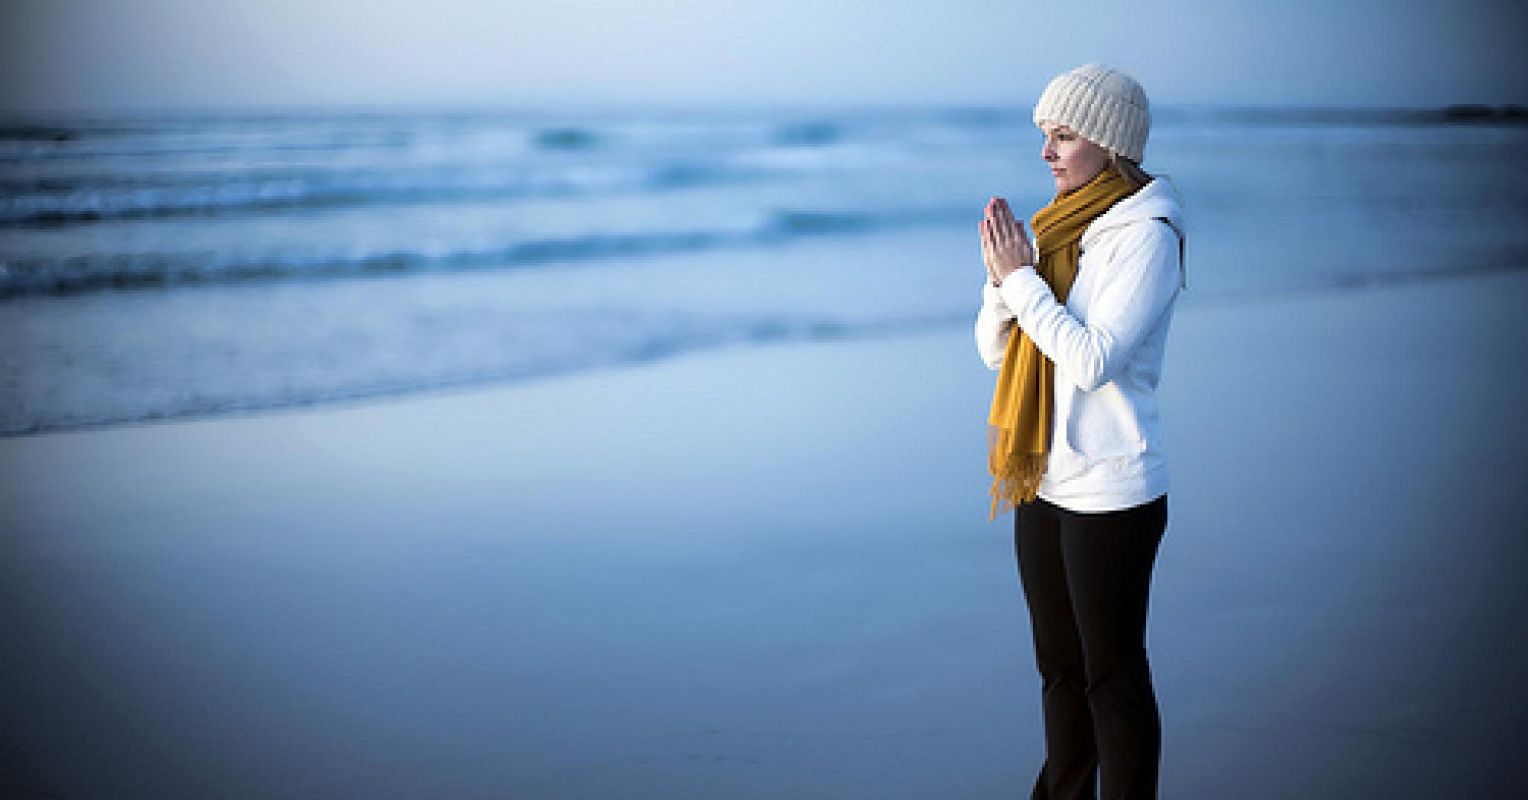 How to Practice Mindfulness – 5 Tips No One Has Told You